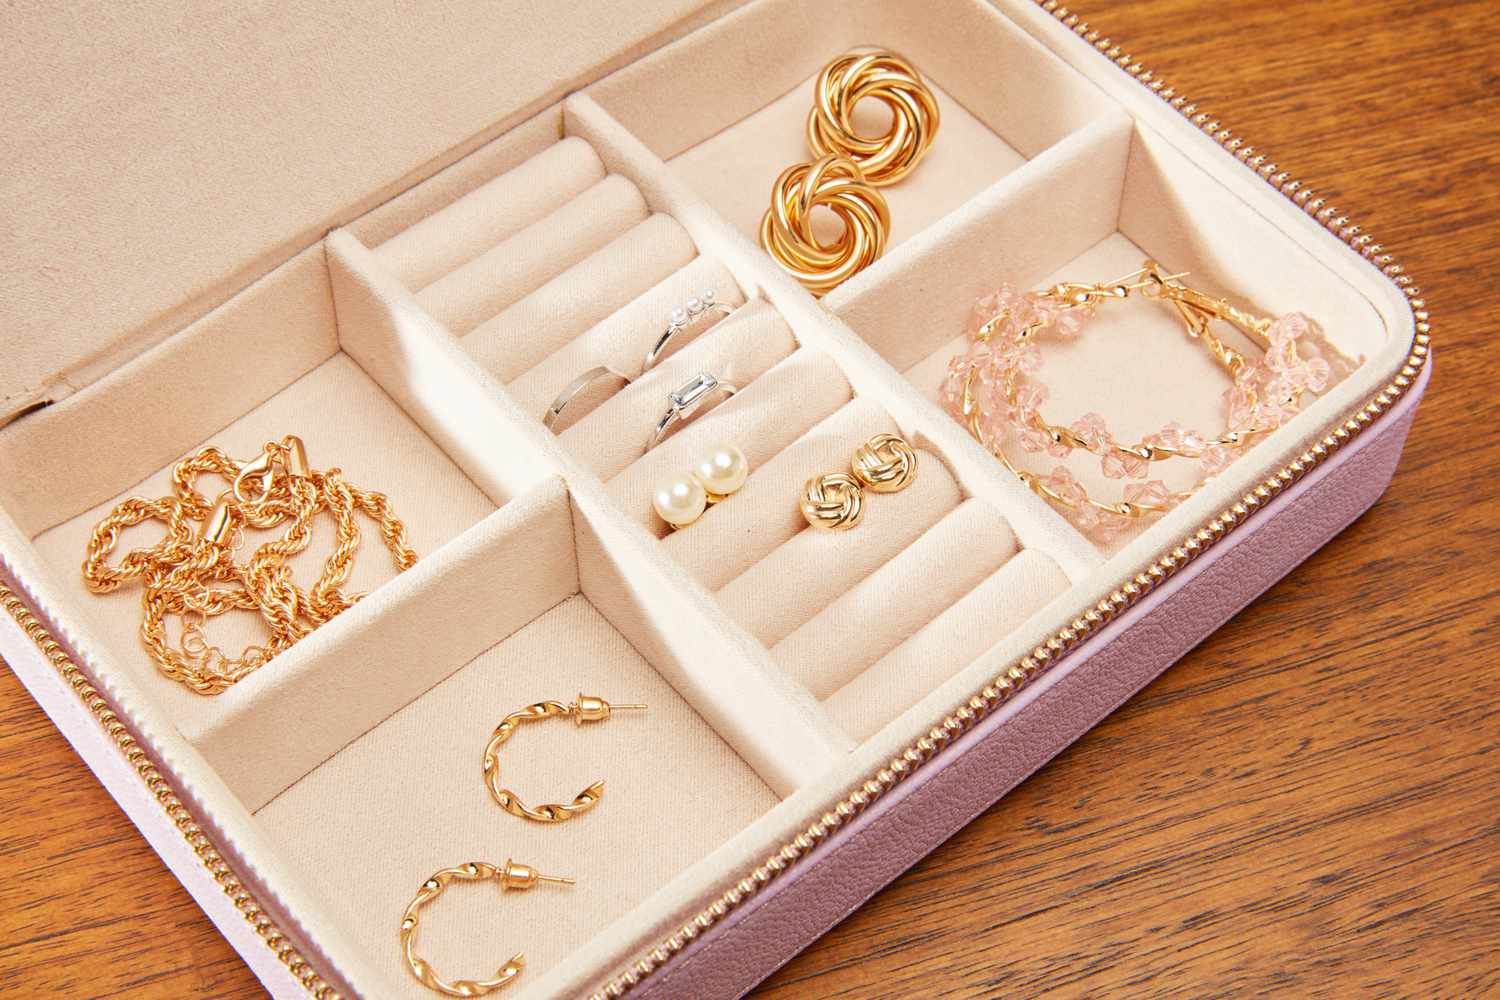 The different compartments of the Kendra Scott Medium Travel Jewelry Case filled with jewelry.